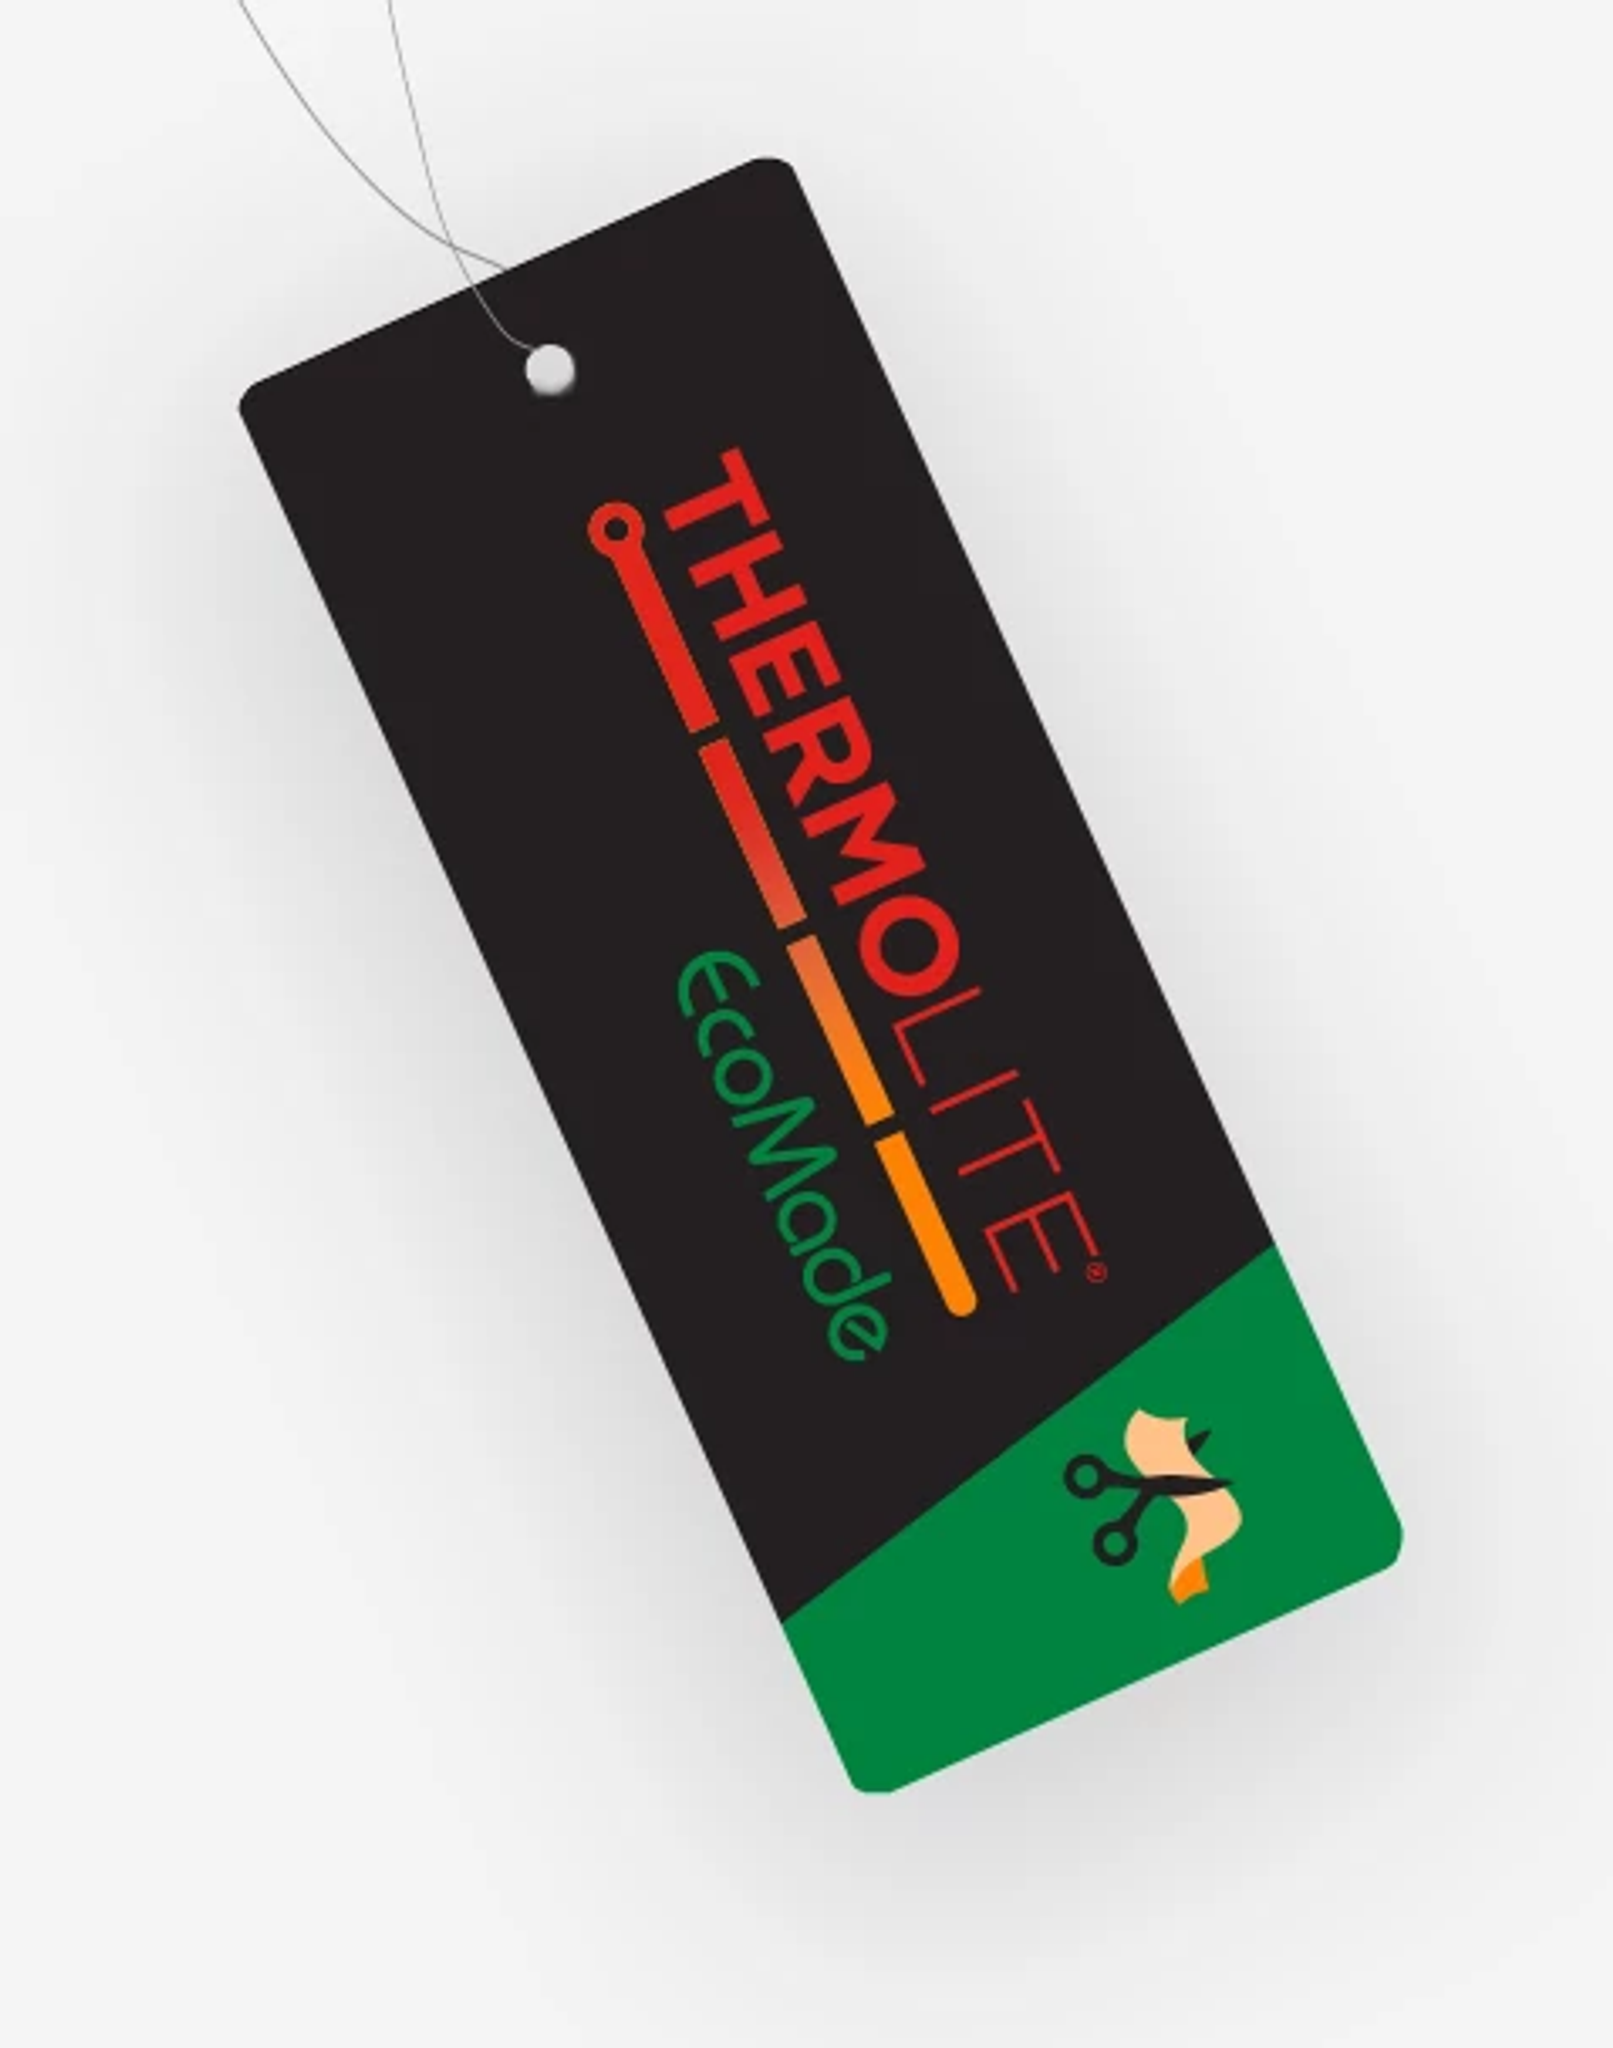 The hangtag for our latest sustainable warming product:  THERMOLITE® EcoMade technology made with 100% textile waste.